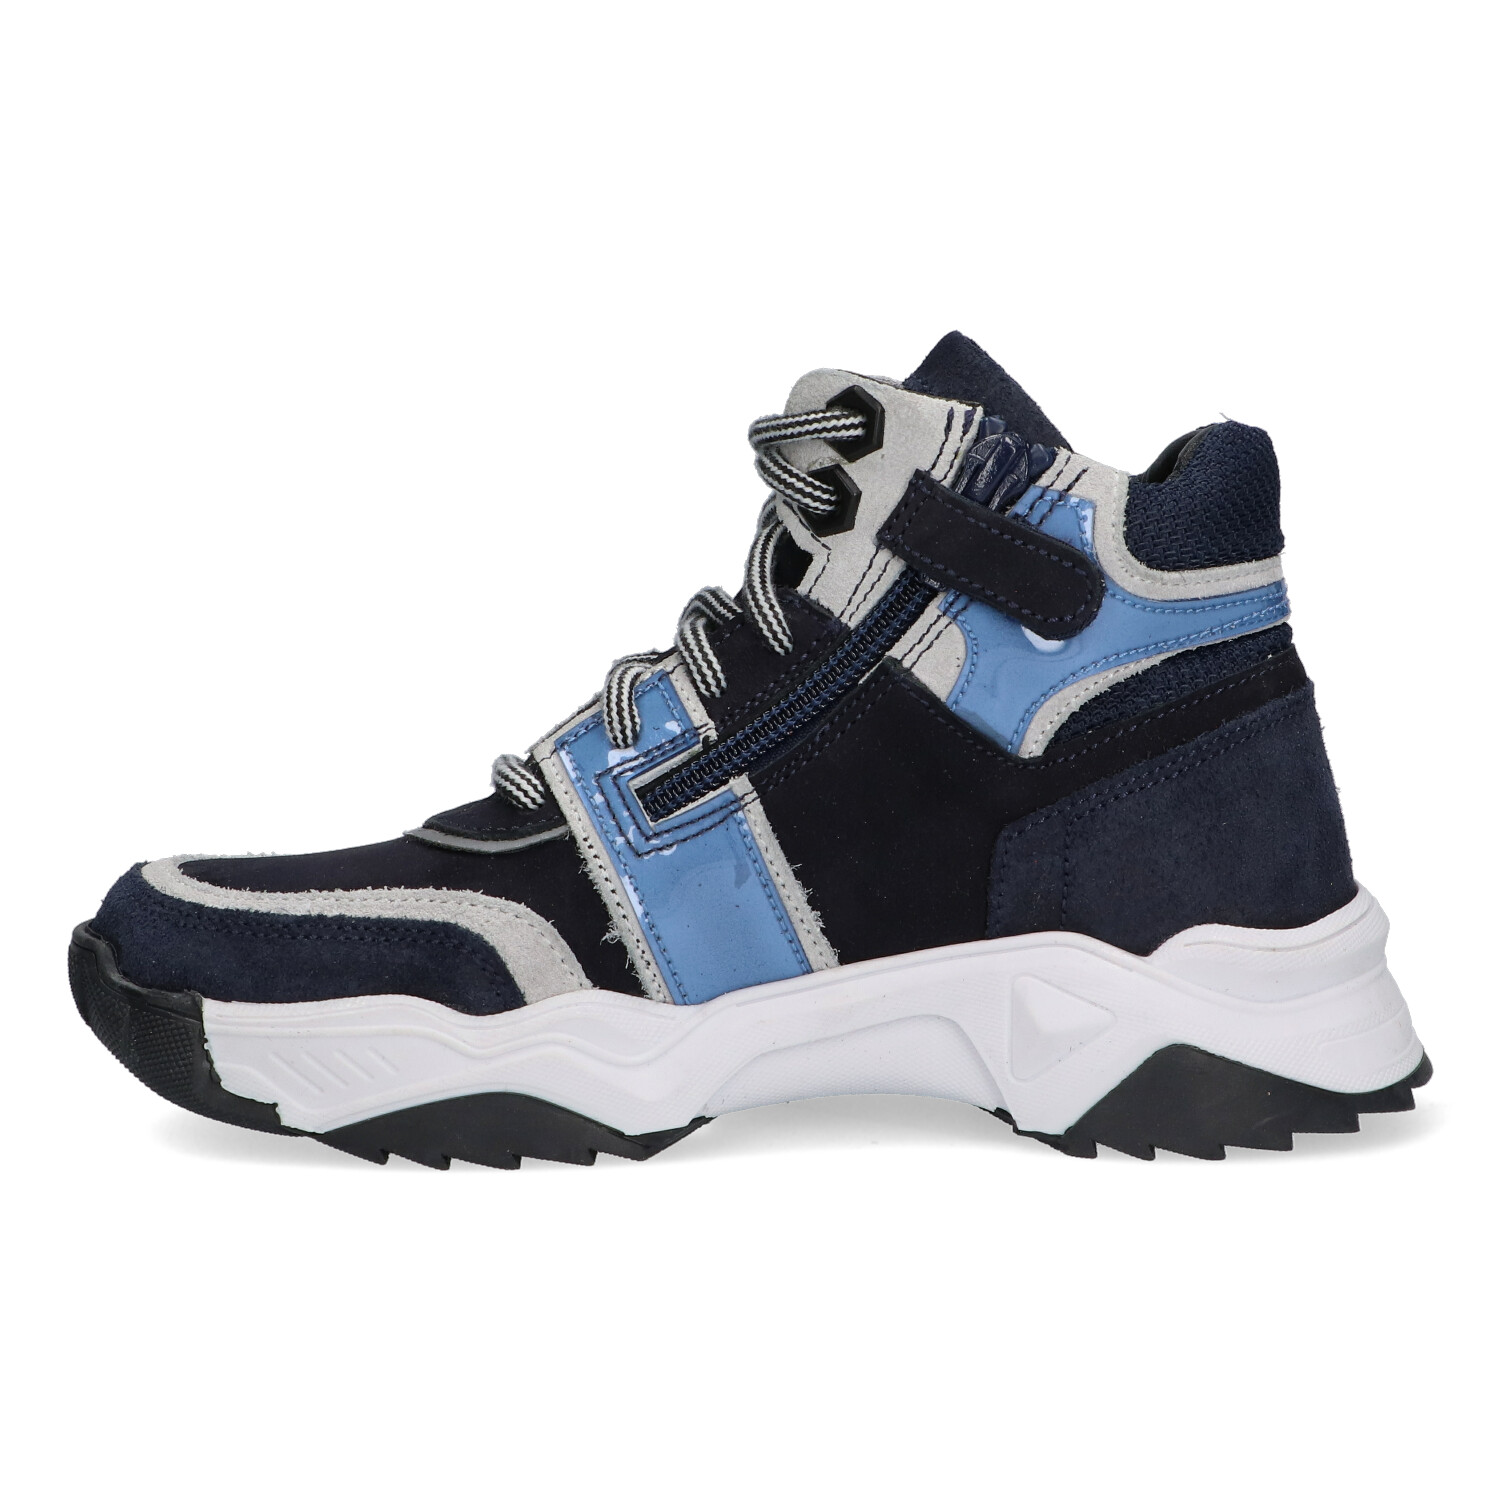 Trackstyle 322860 Boot Andy Athletic Dark Blue 3.5